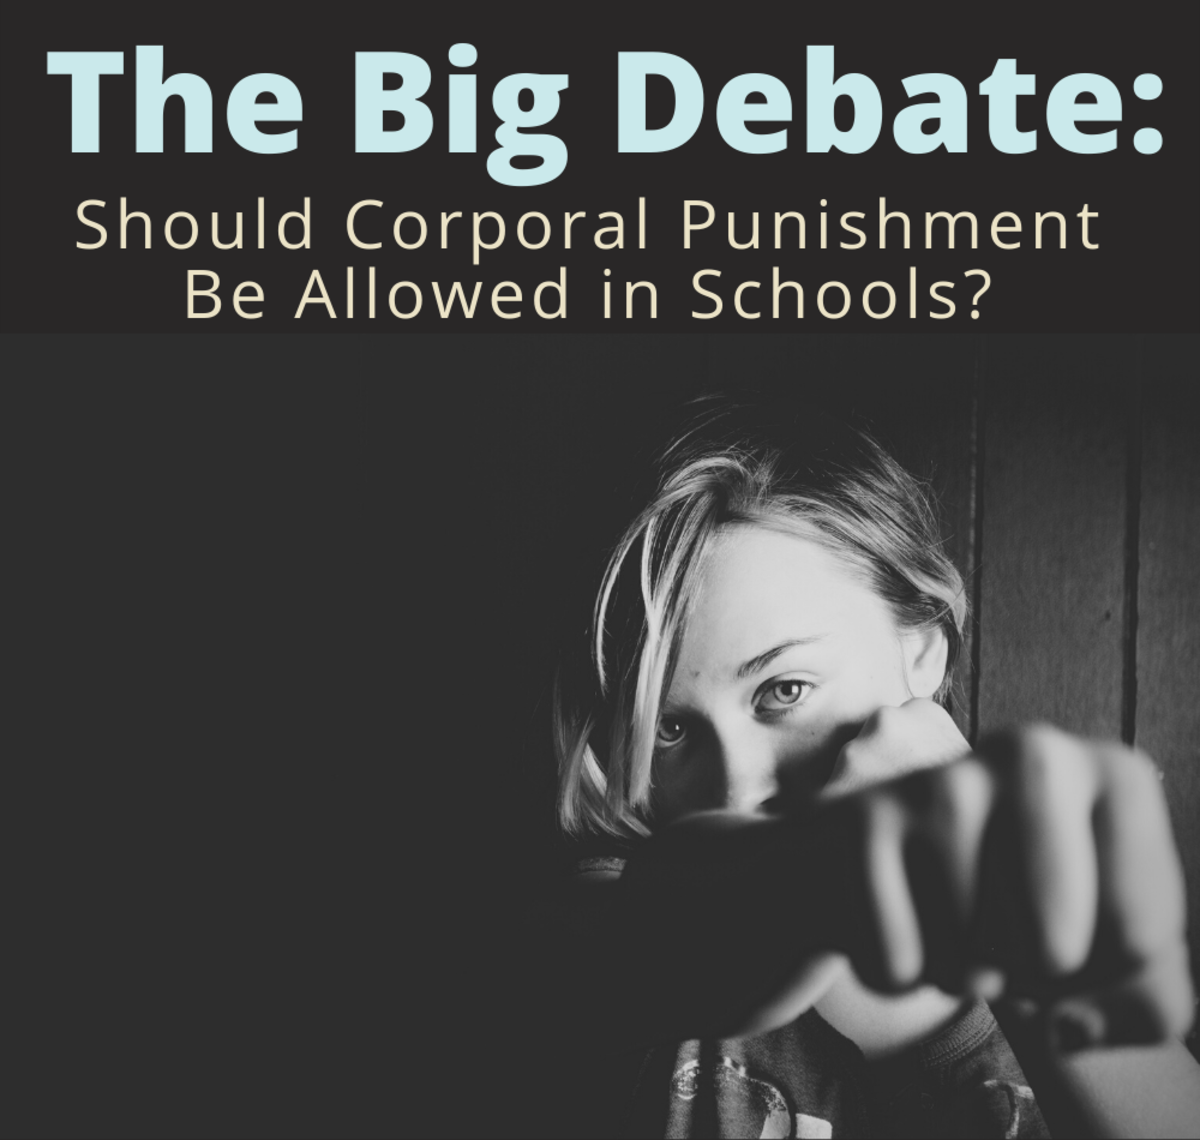 The Pros and Cons of the Corporal Punishment Debate